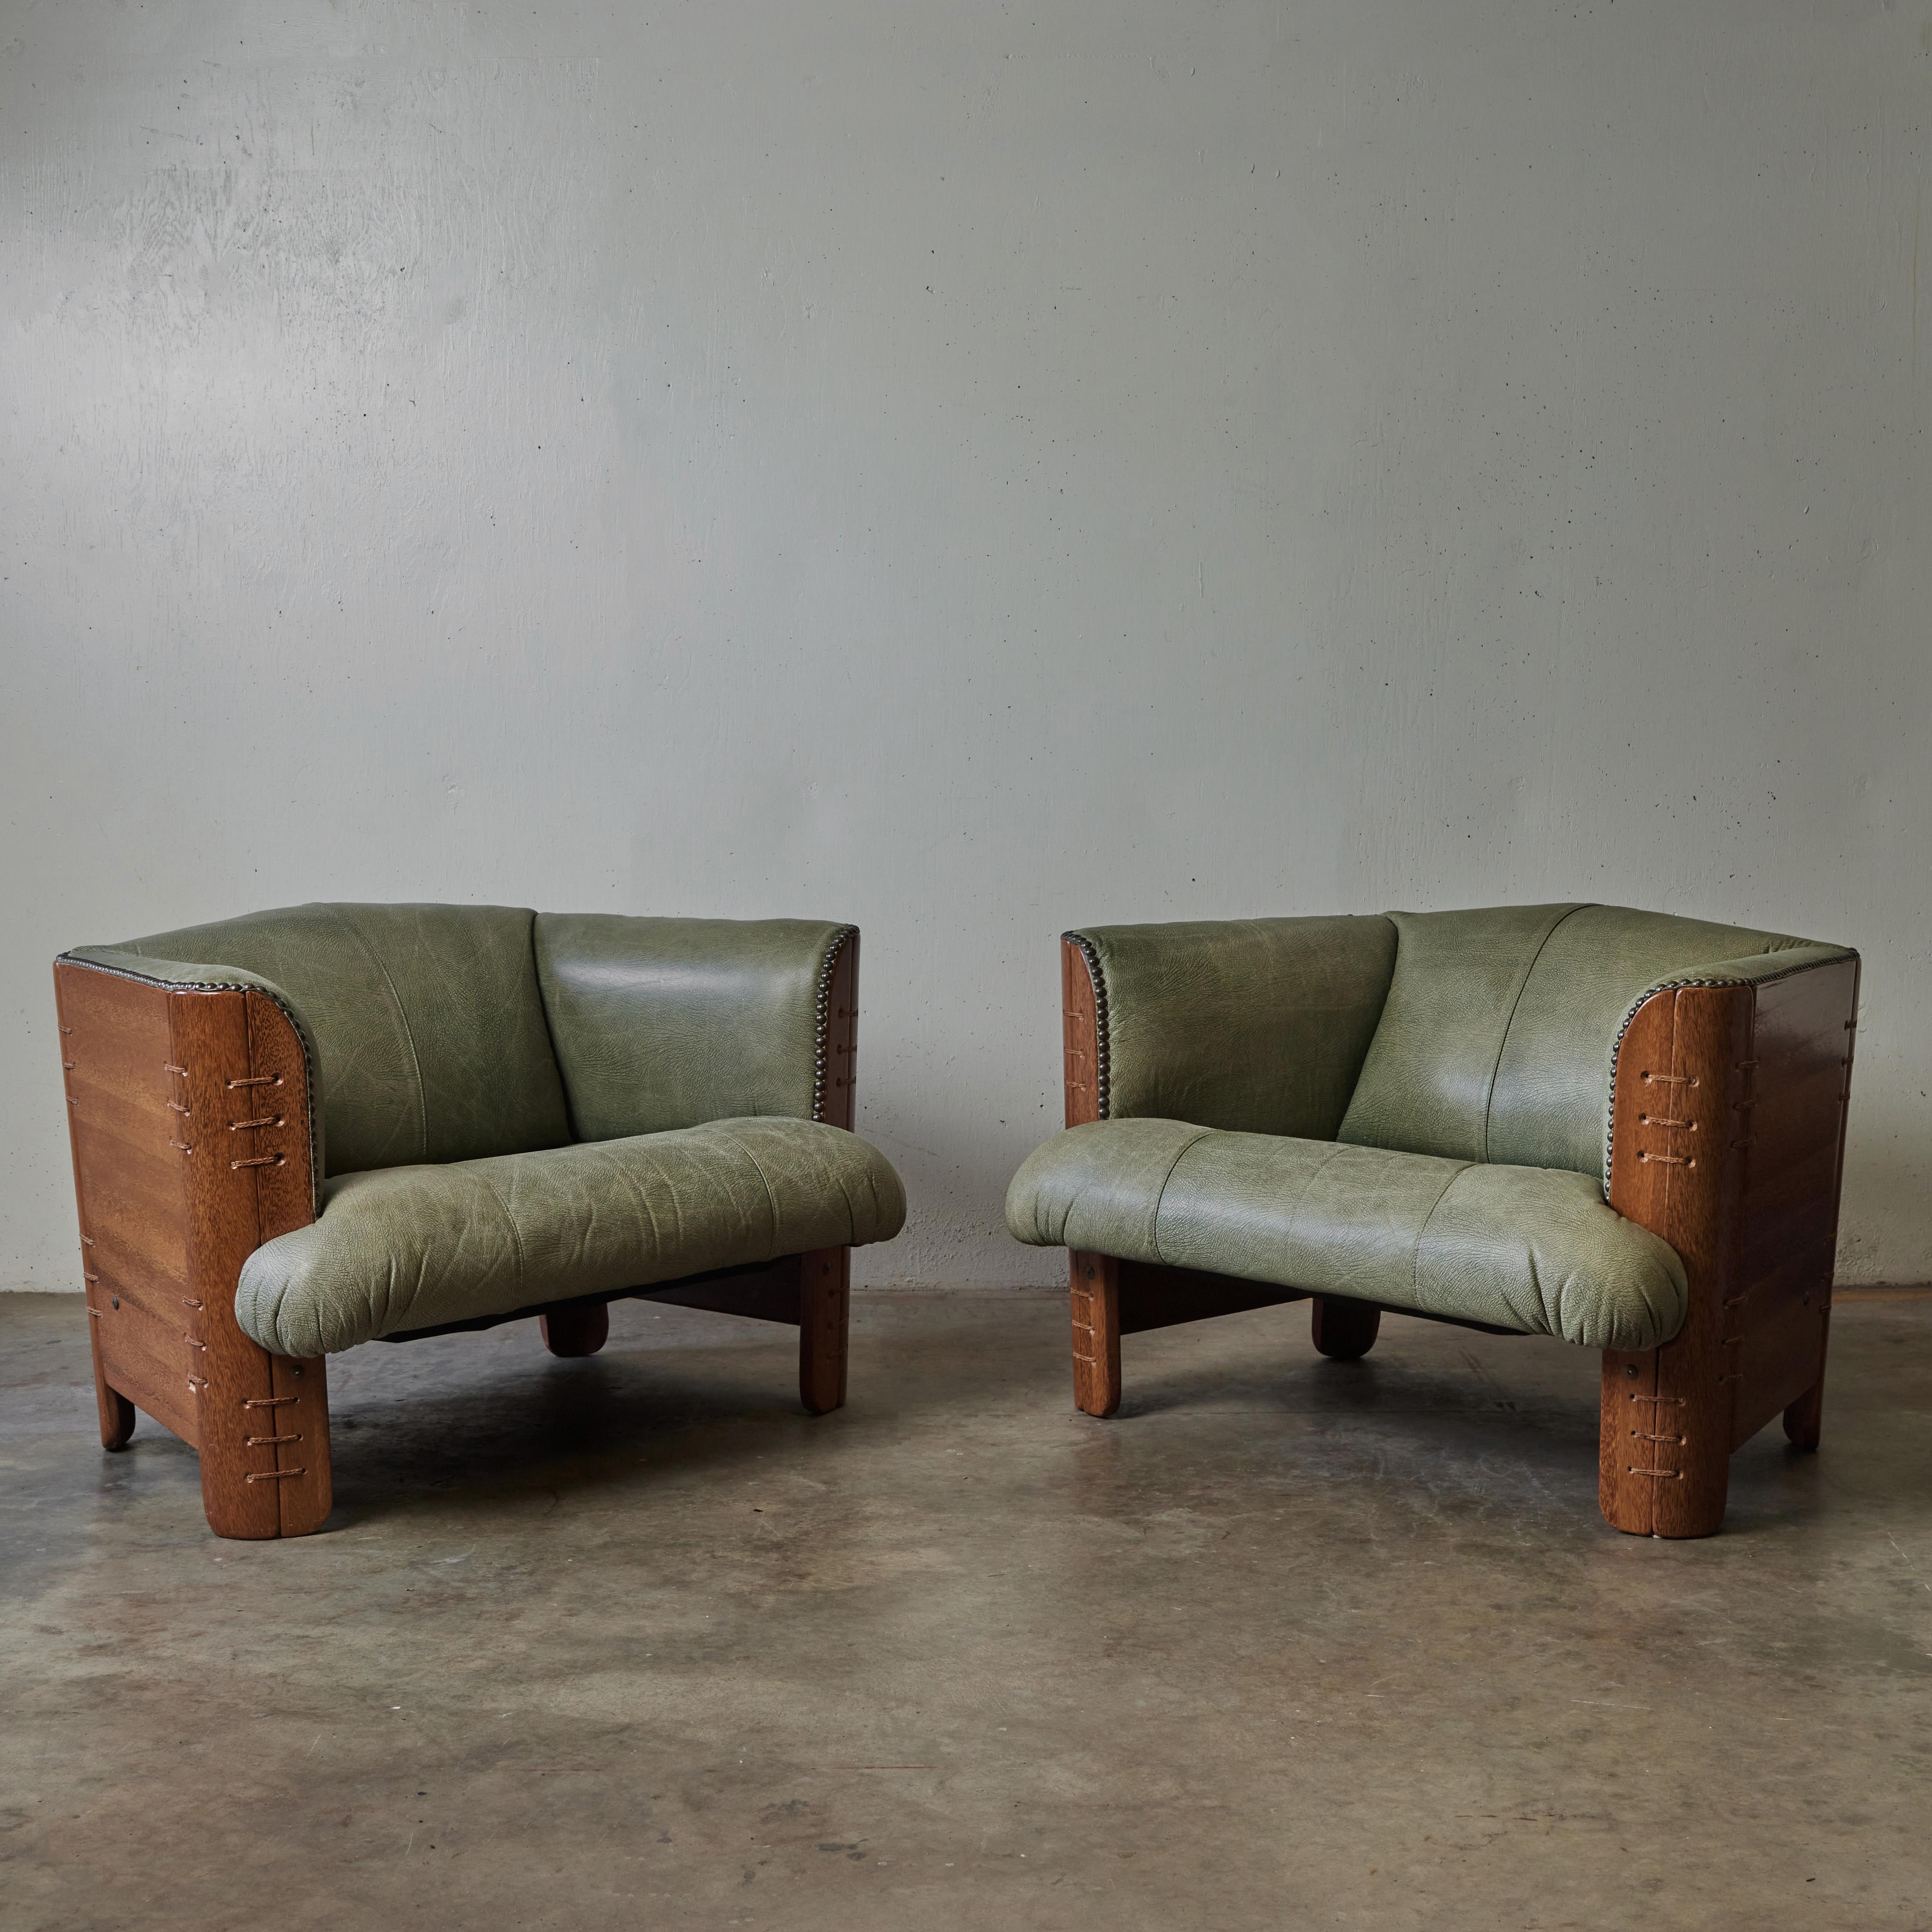 Gorgeous pair of mid-century chairs in palmwood (a sustainable alternative to tropical hardwood) with the original textured celadon green leather upholstery, designed by Pacific Green. Chic and statement-making yet with an easy, relaxed sensibility,